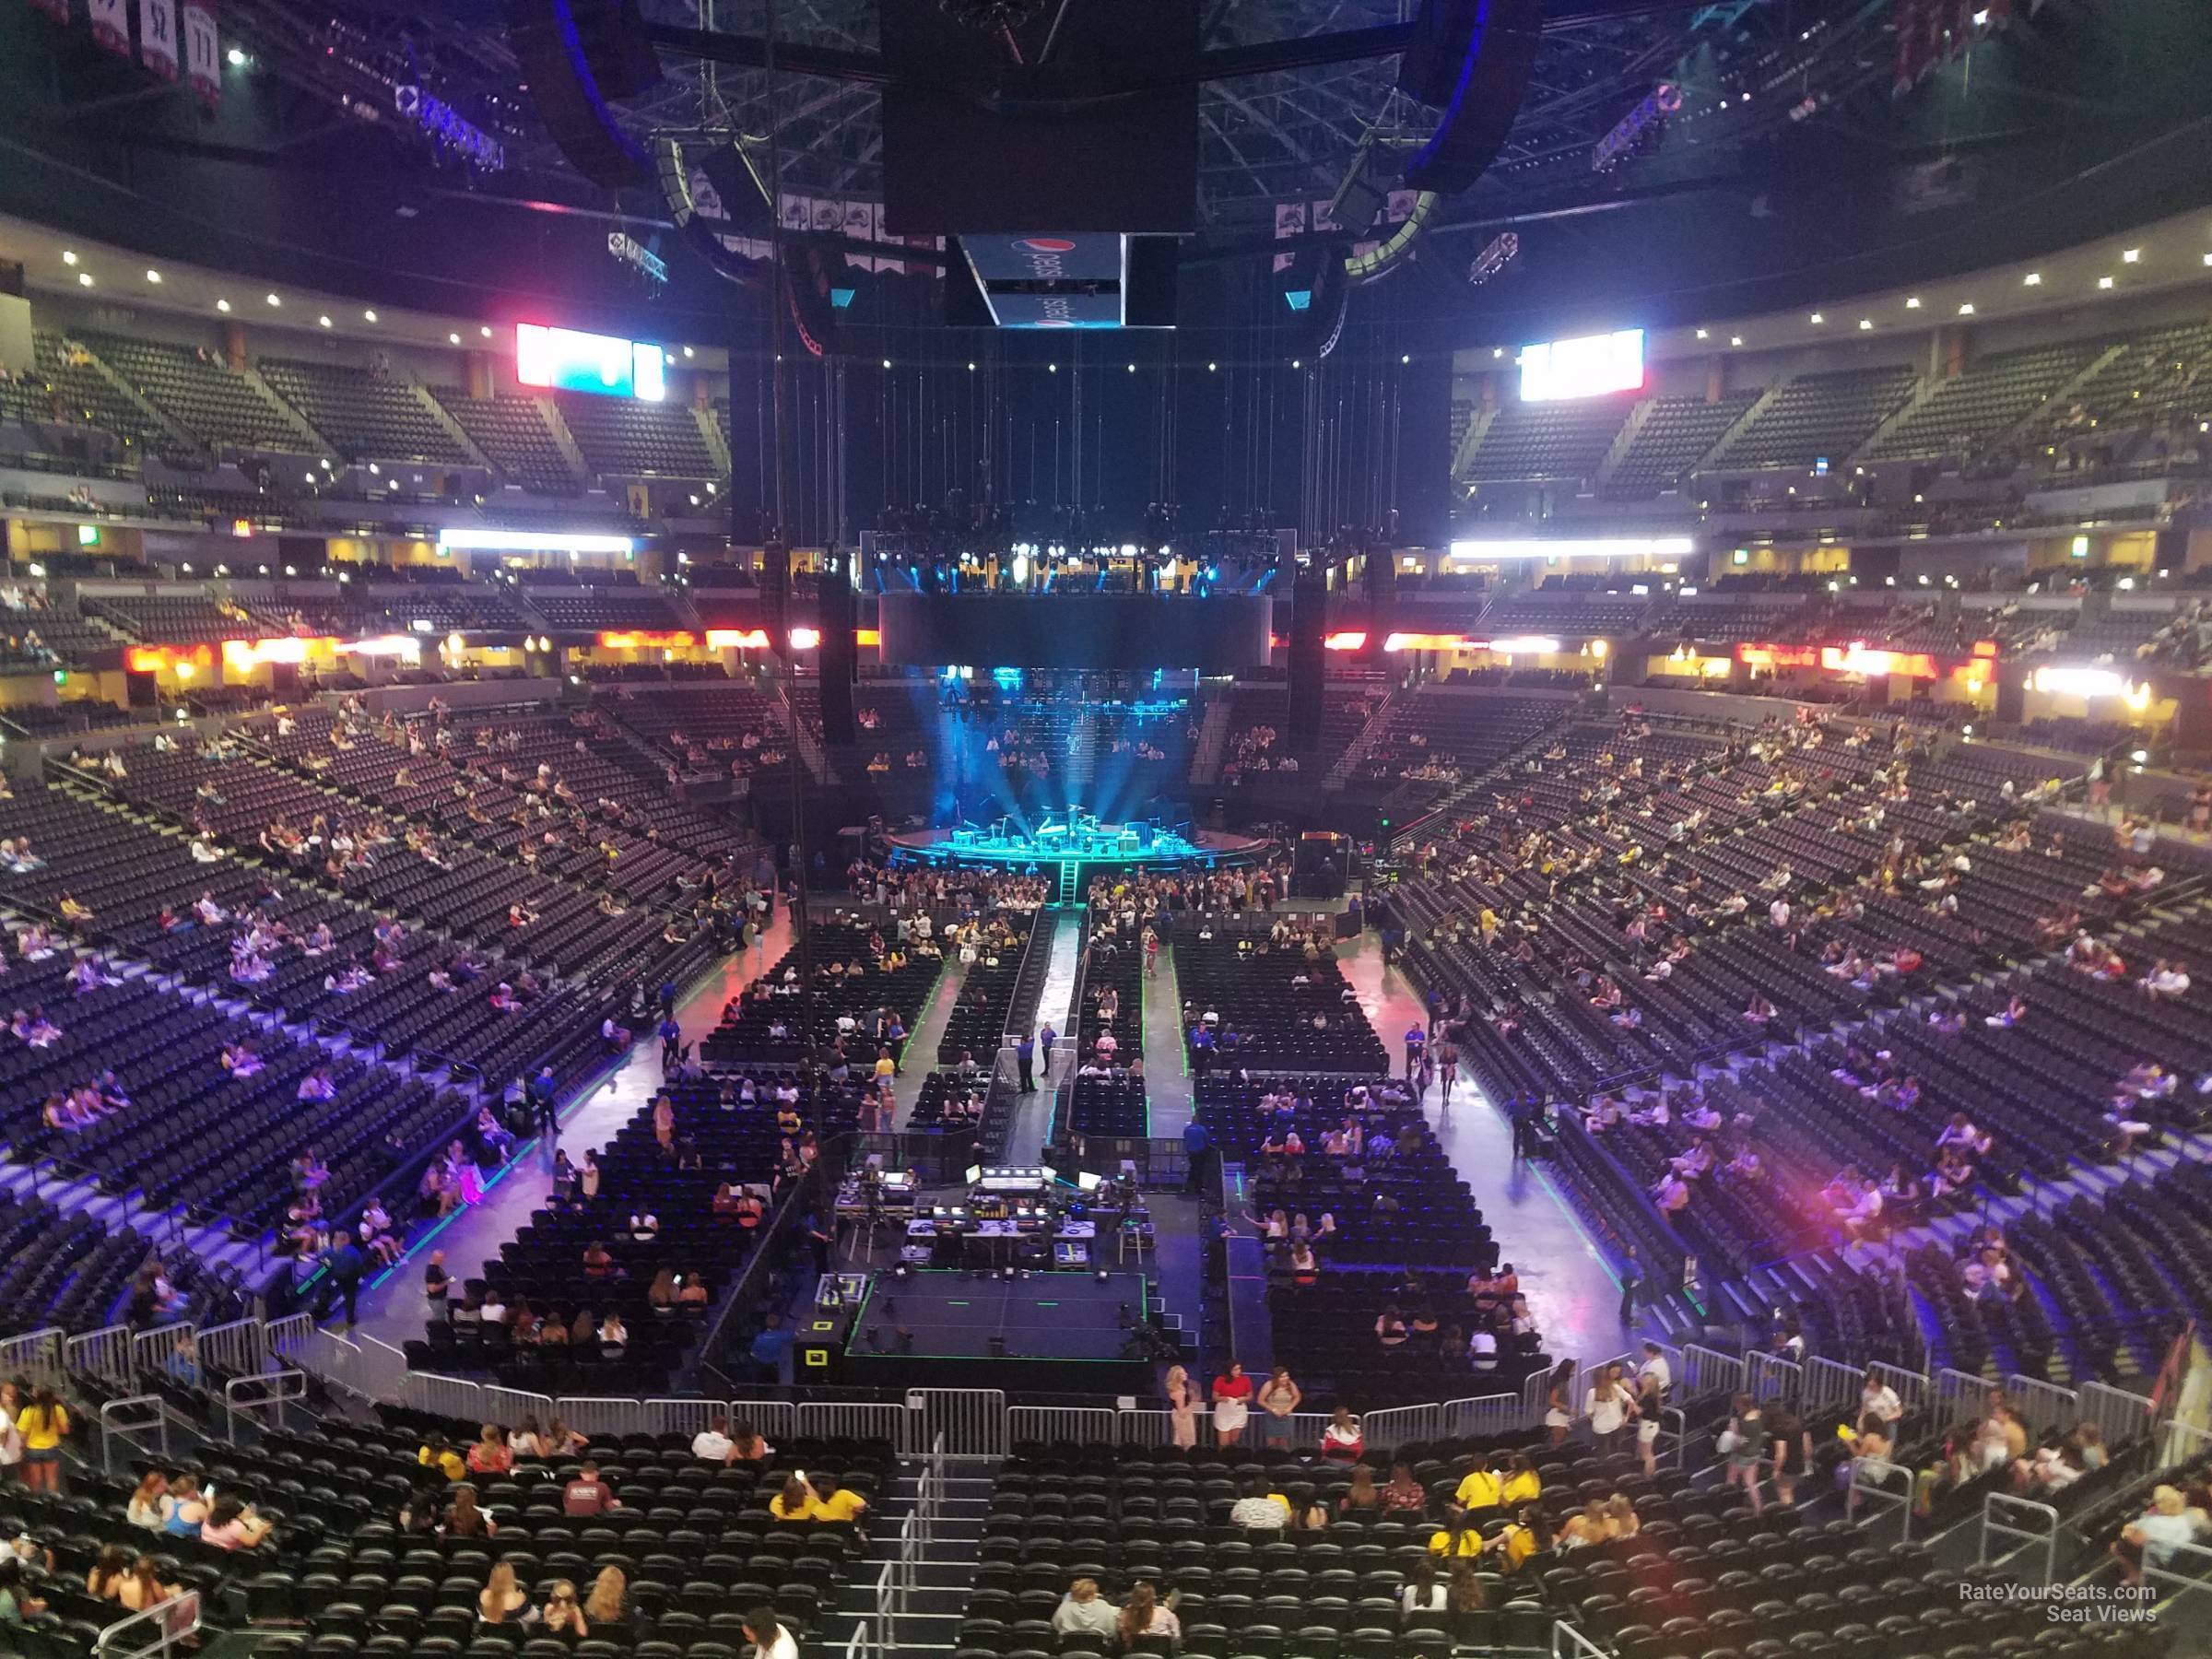 section 216, row 4 seat view  for concert - ball arena